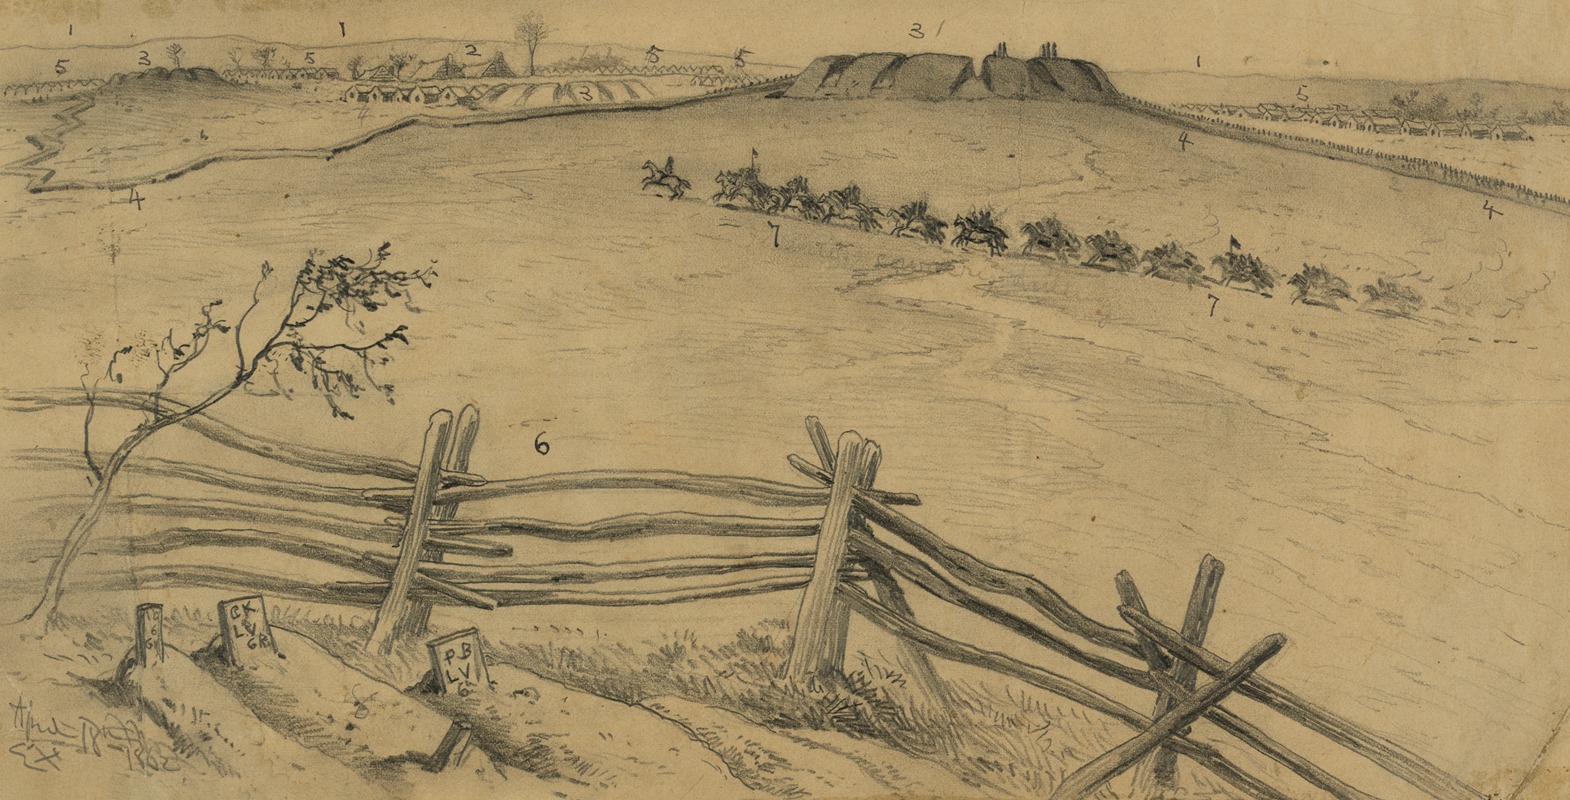 Edwin Forbes - The defenses of Centreville, forts, breastworks, etc., from a point south of the Warrenton turnpike